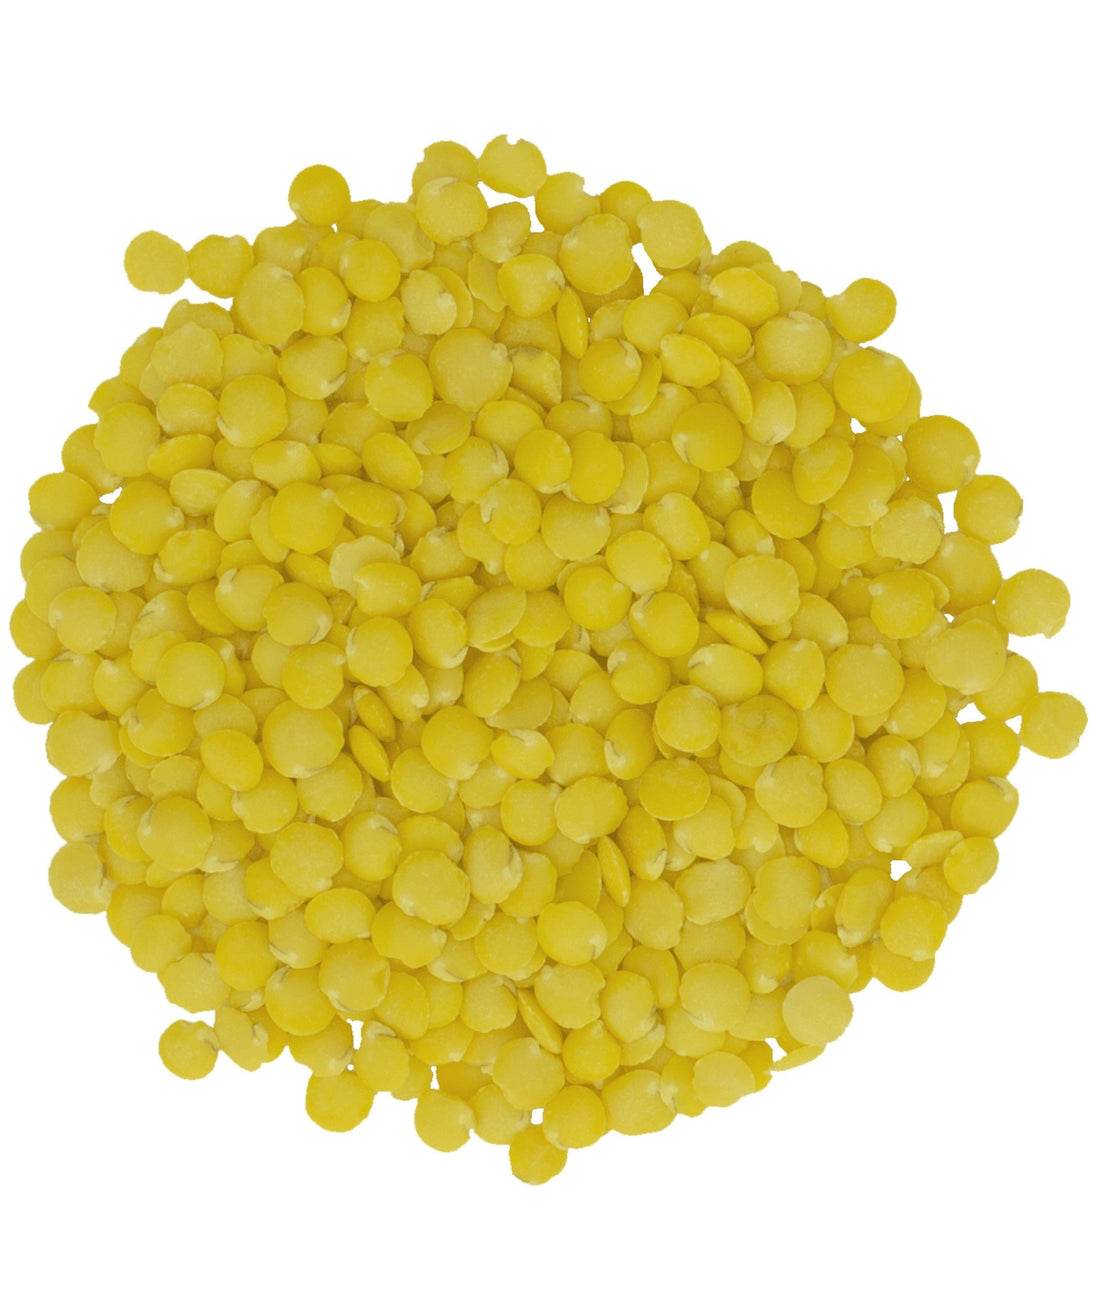 Gold Lentils | 18 LBS | Free 2 Day Shipping Woven Poly Bag